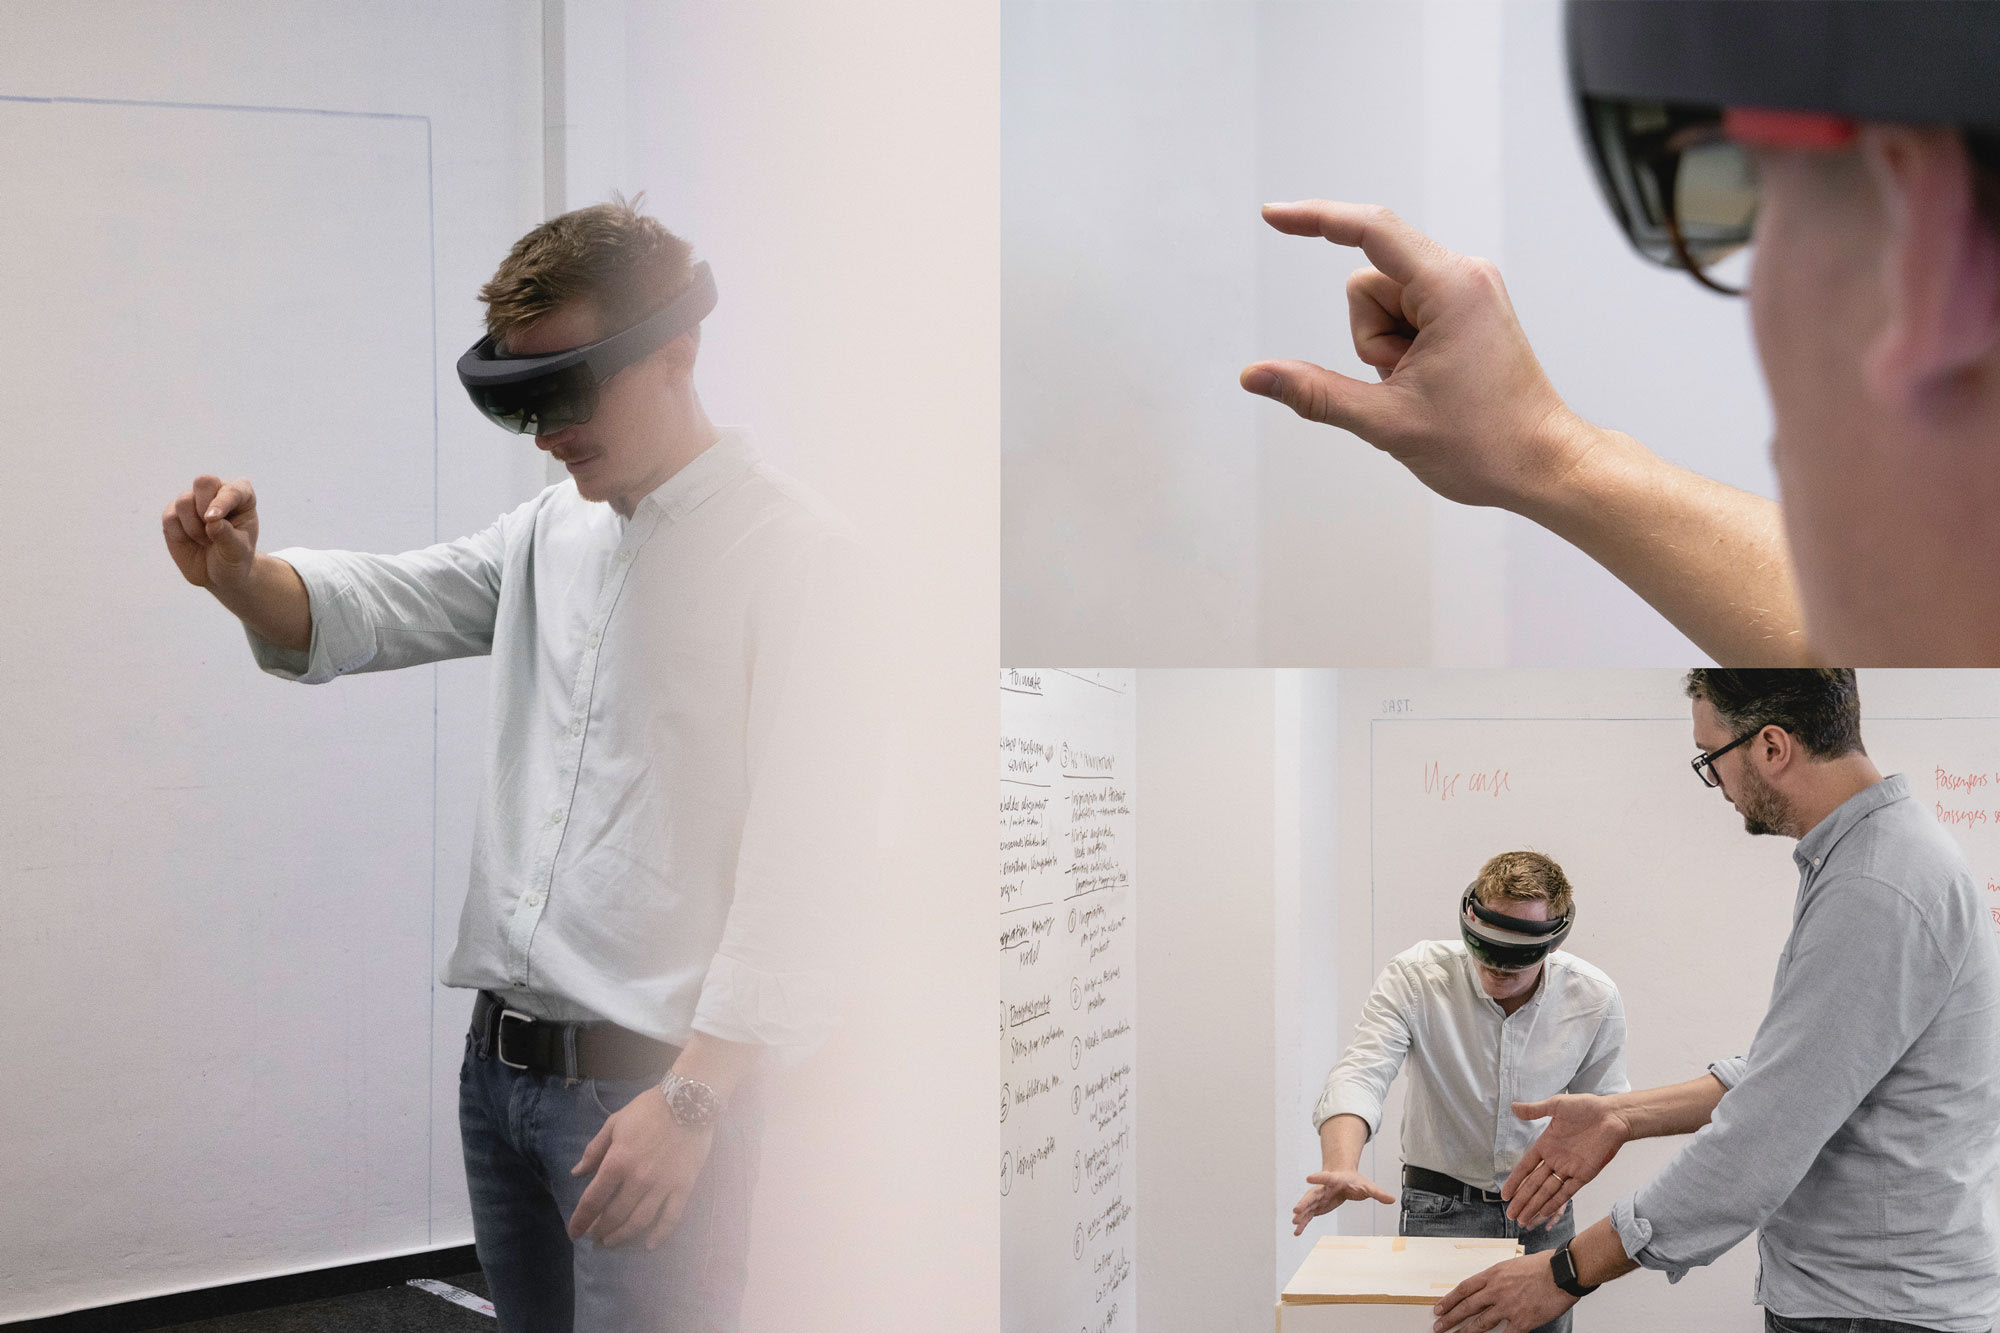 HoloLens Prototyping